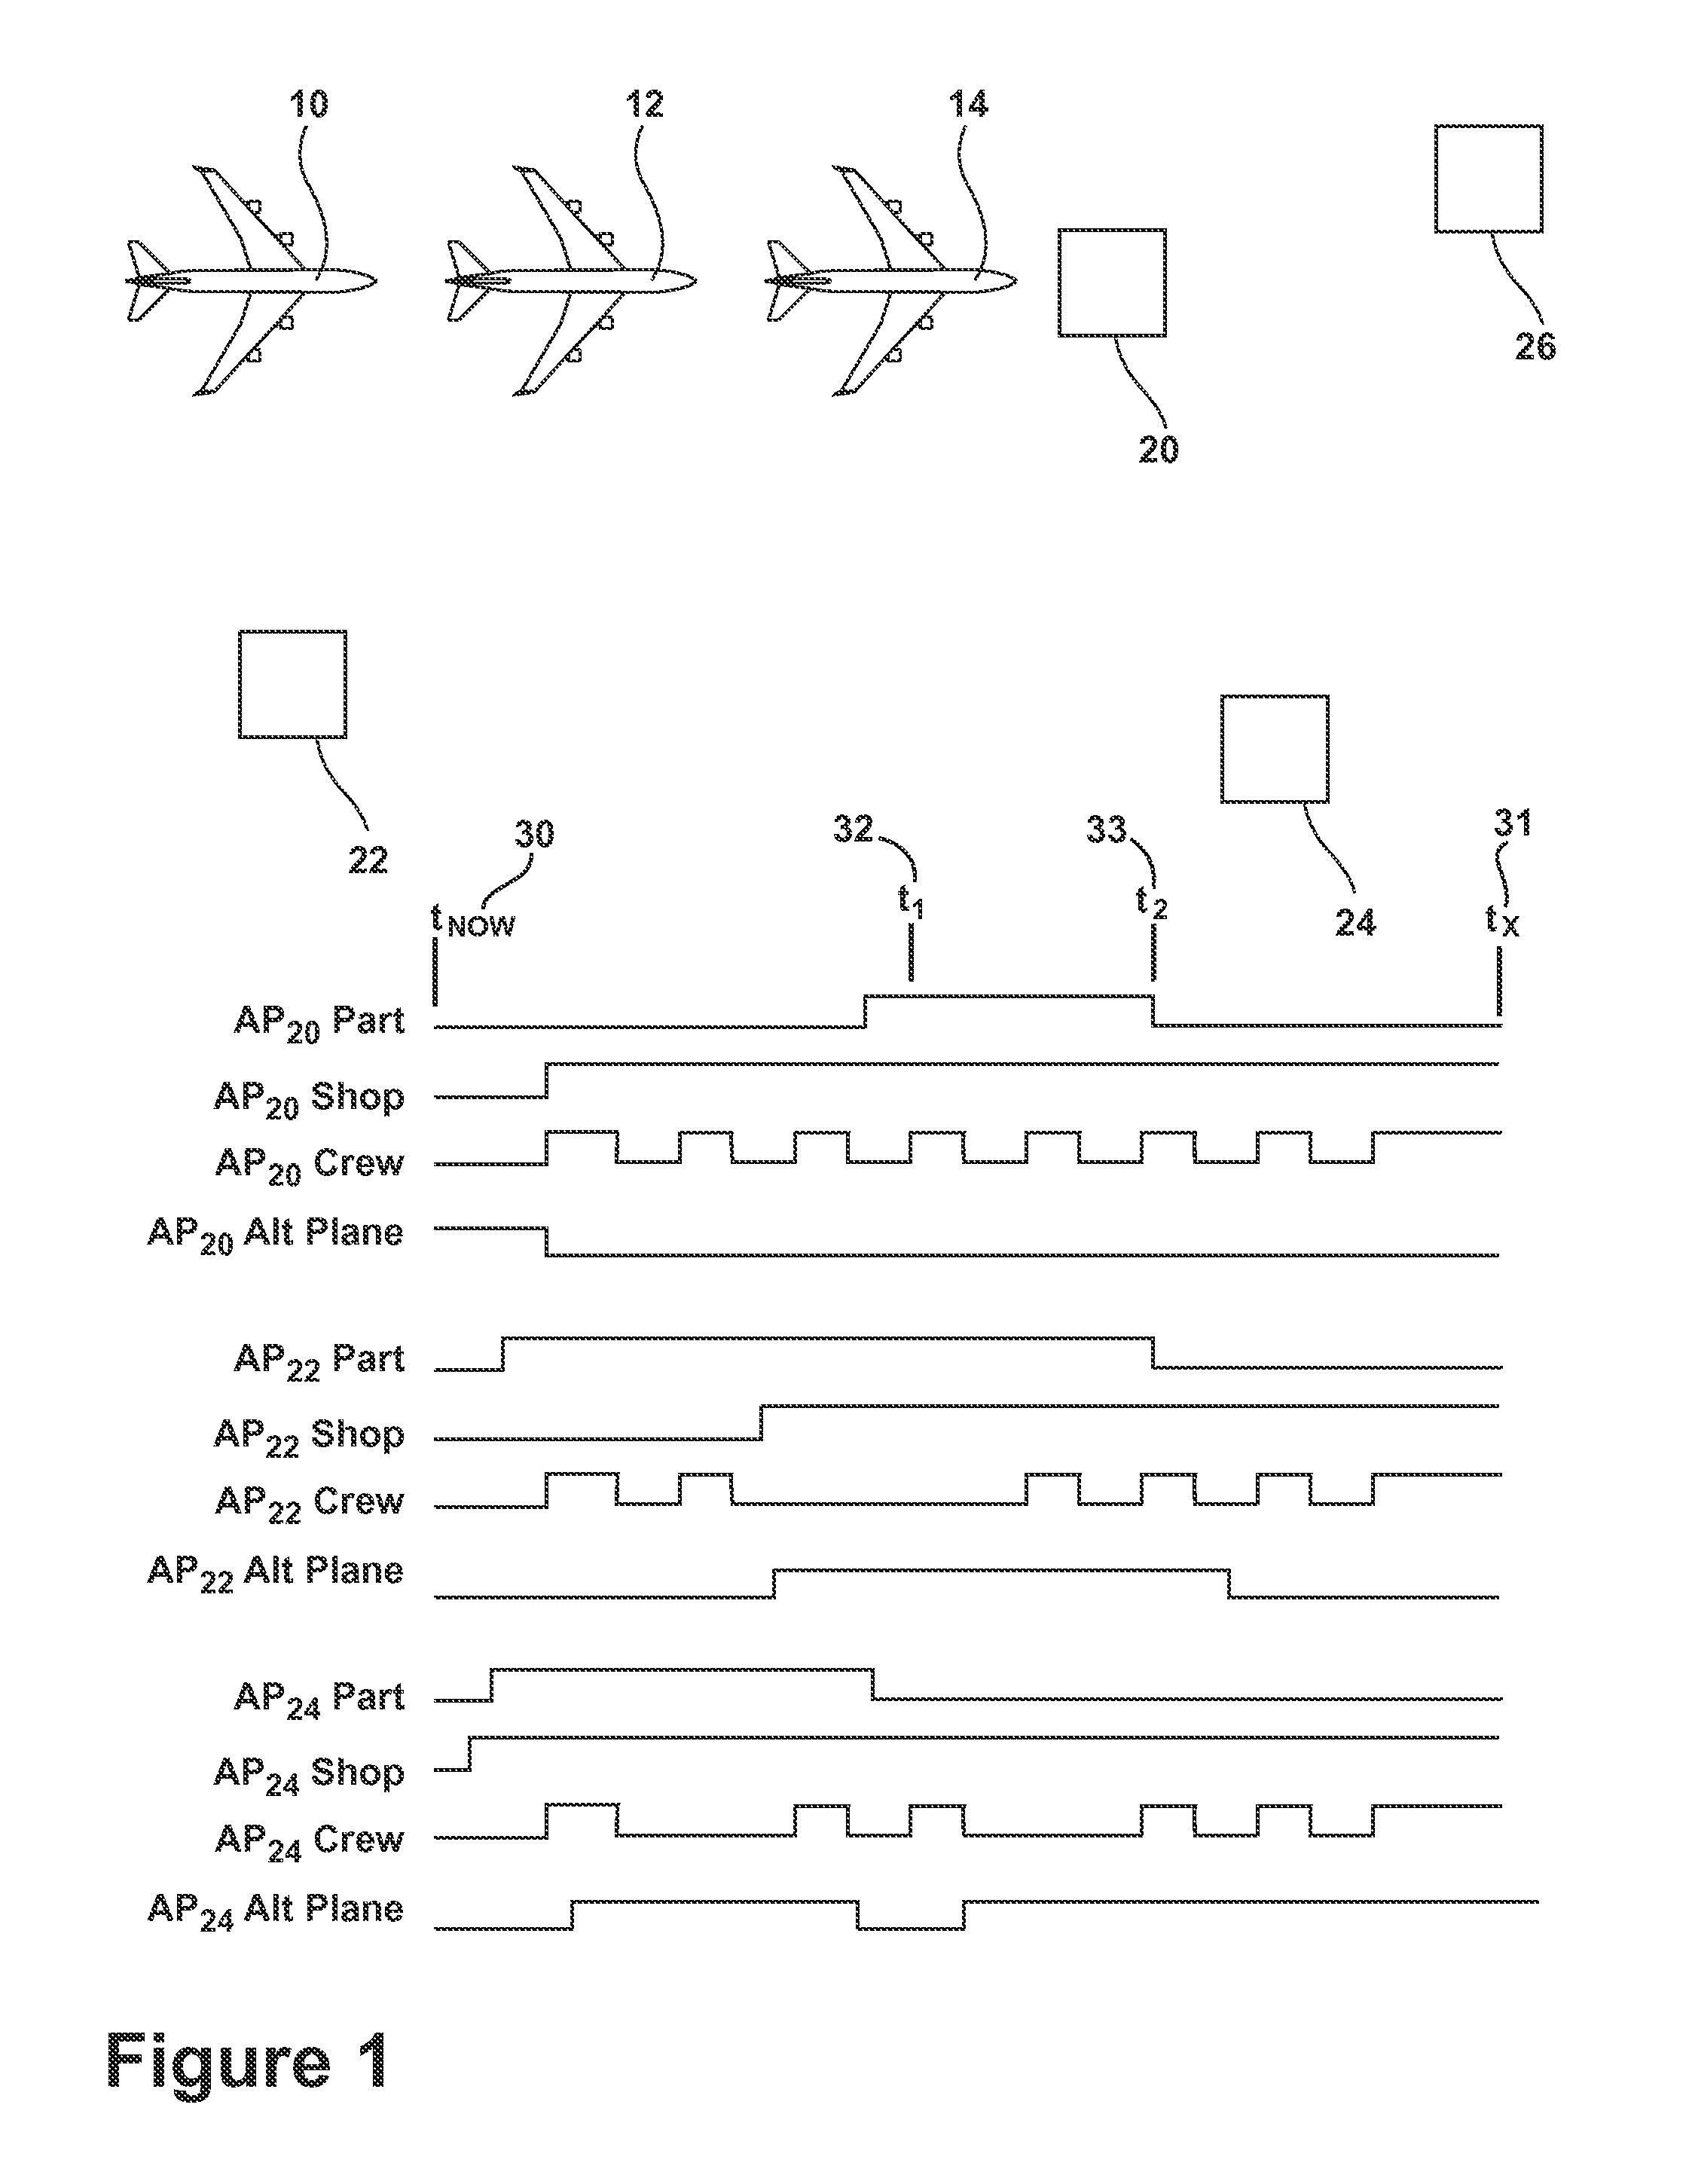 System and method for controlling operation of an airline